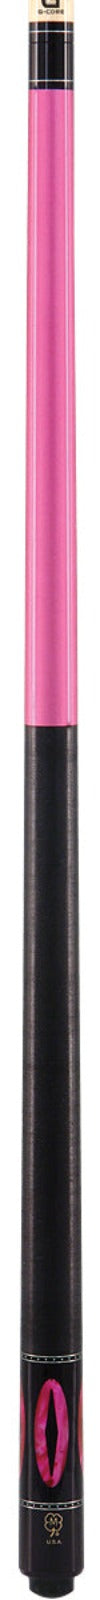 McDermott G215 with G-Core Shaft Pool Cue